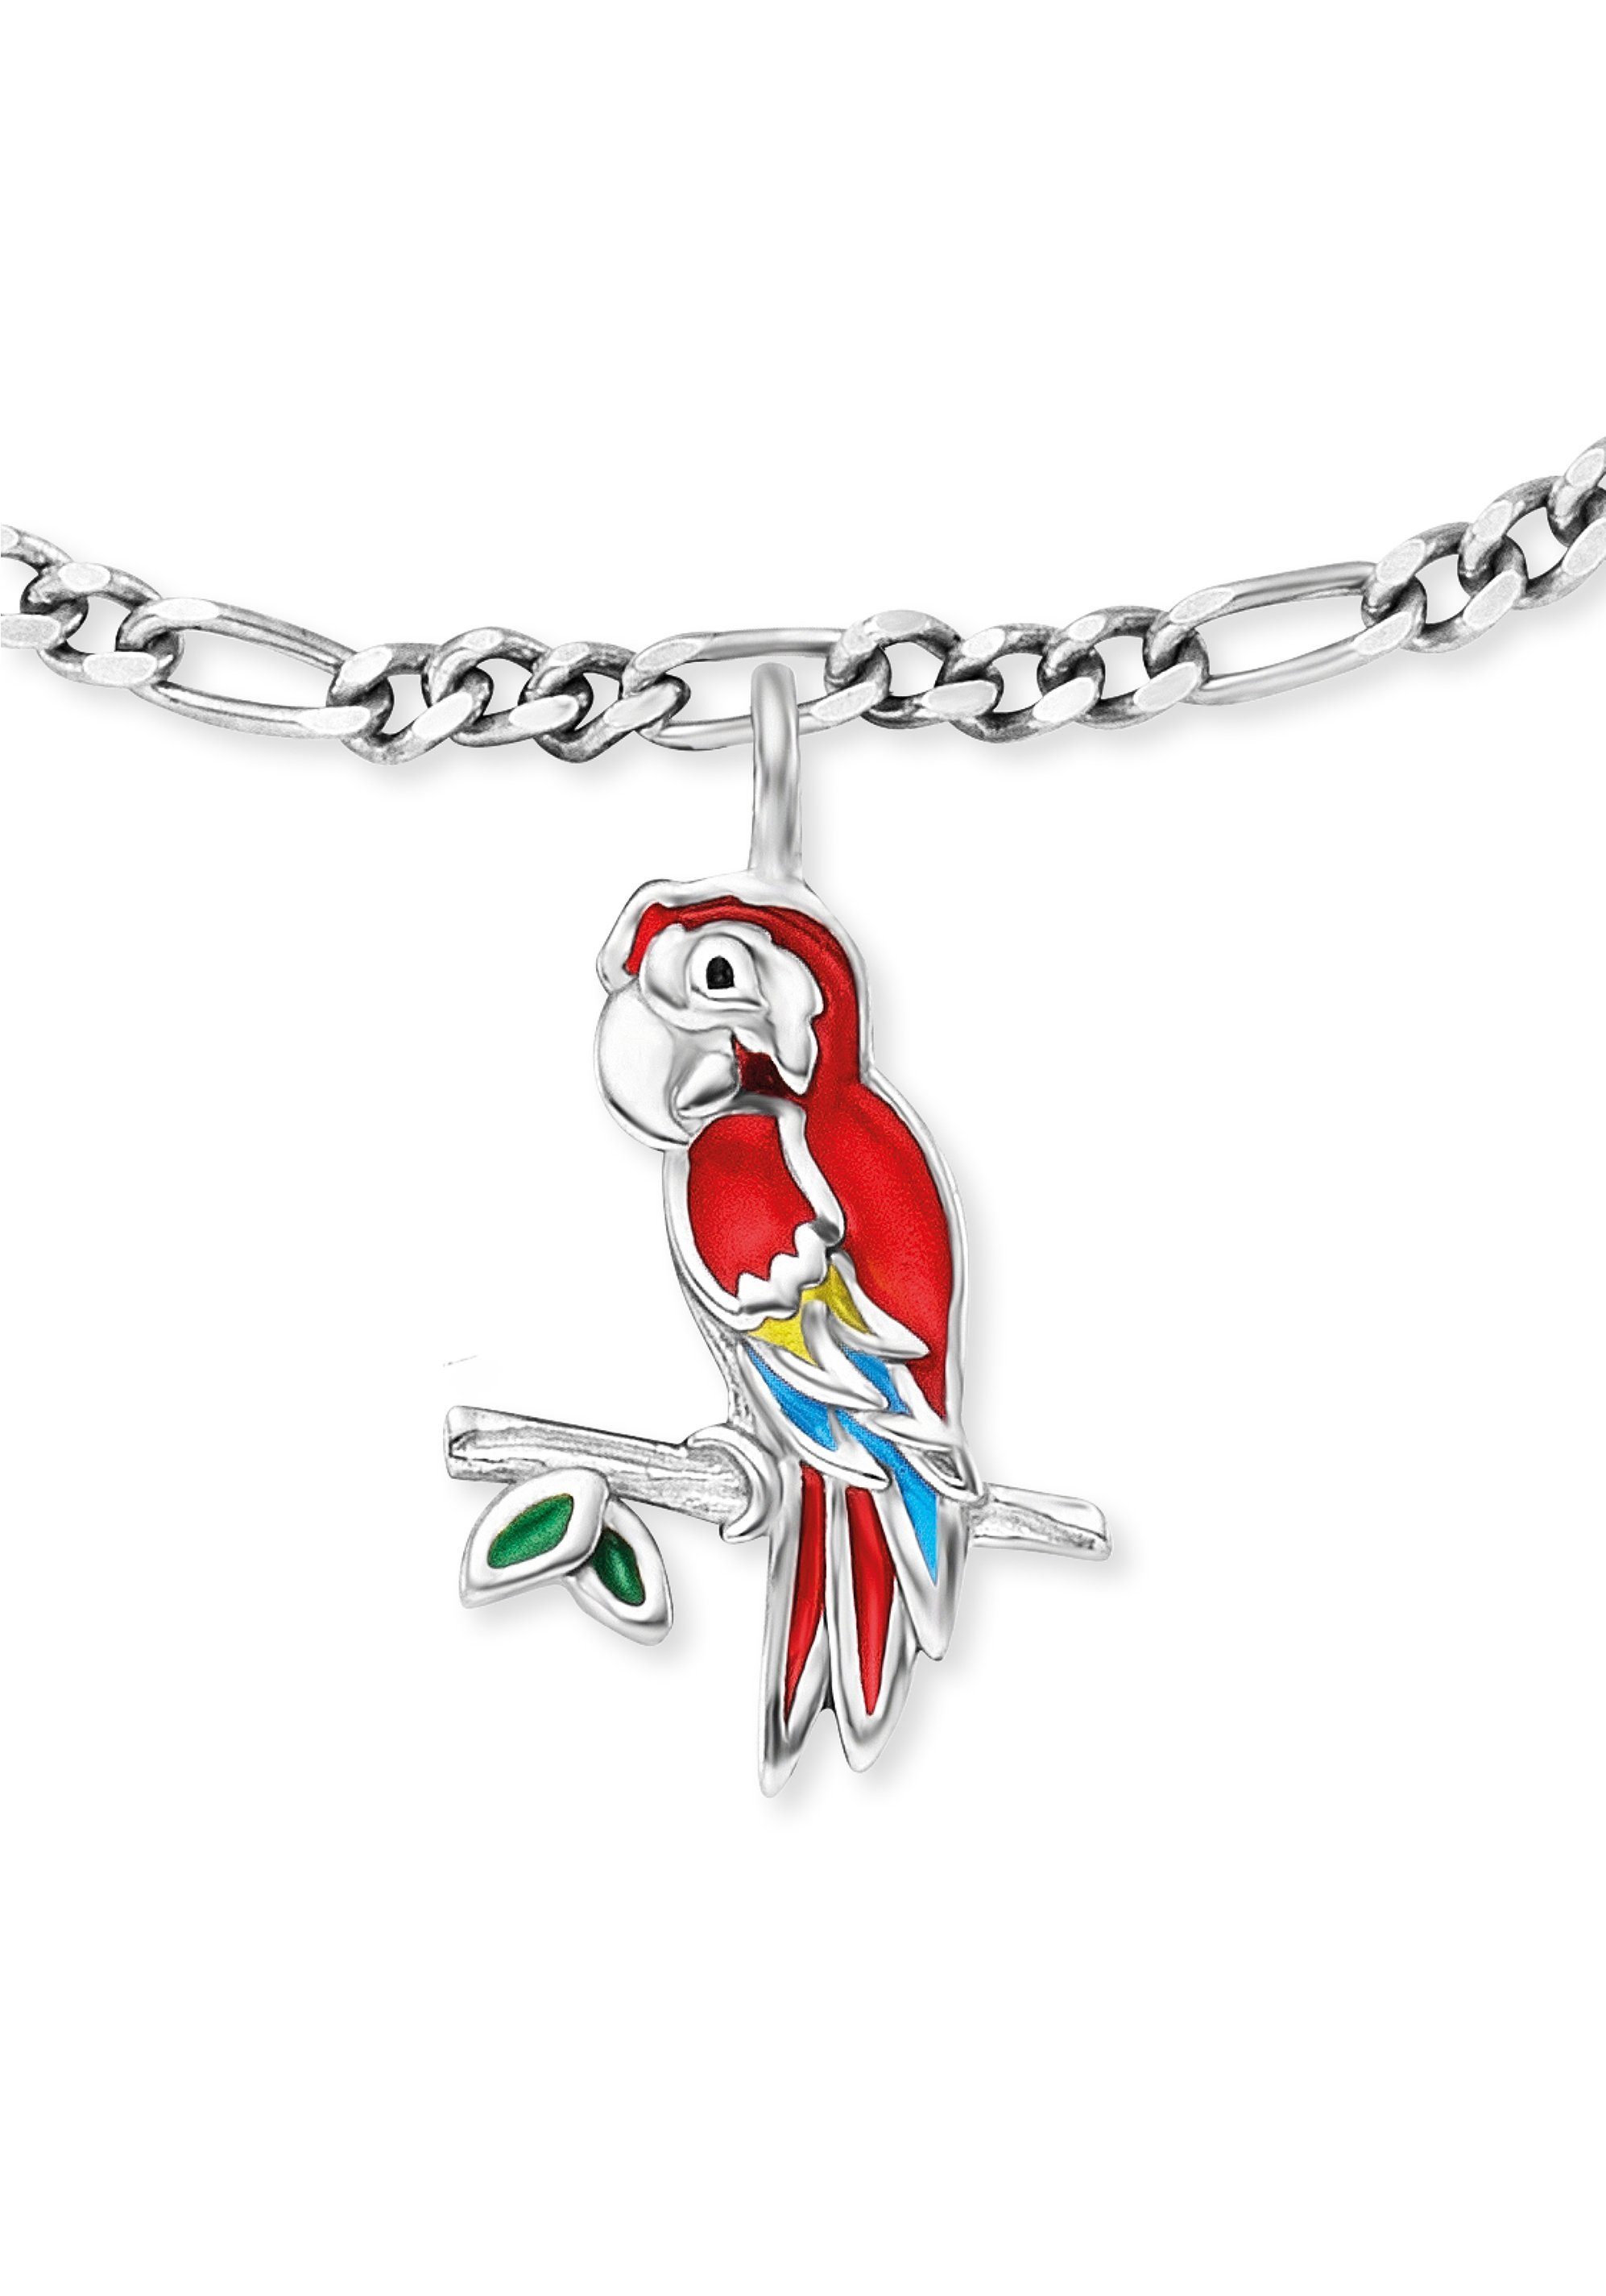 Herzengel Papagei, HEB-PARROT, mit Emaille Armband